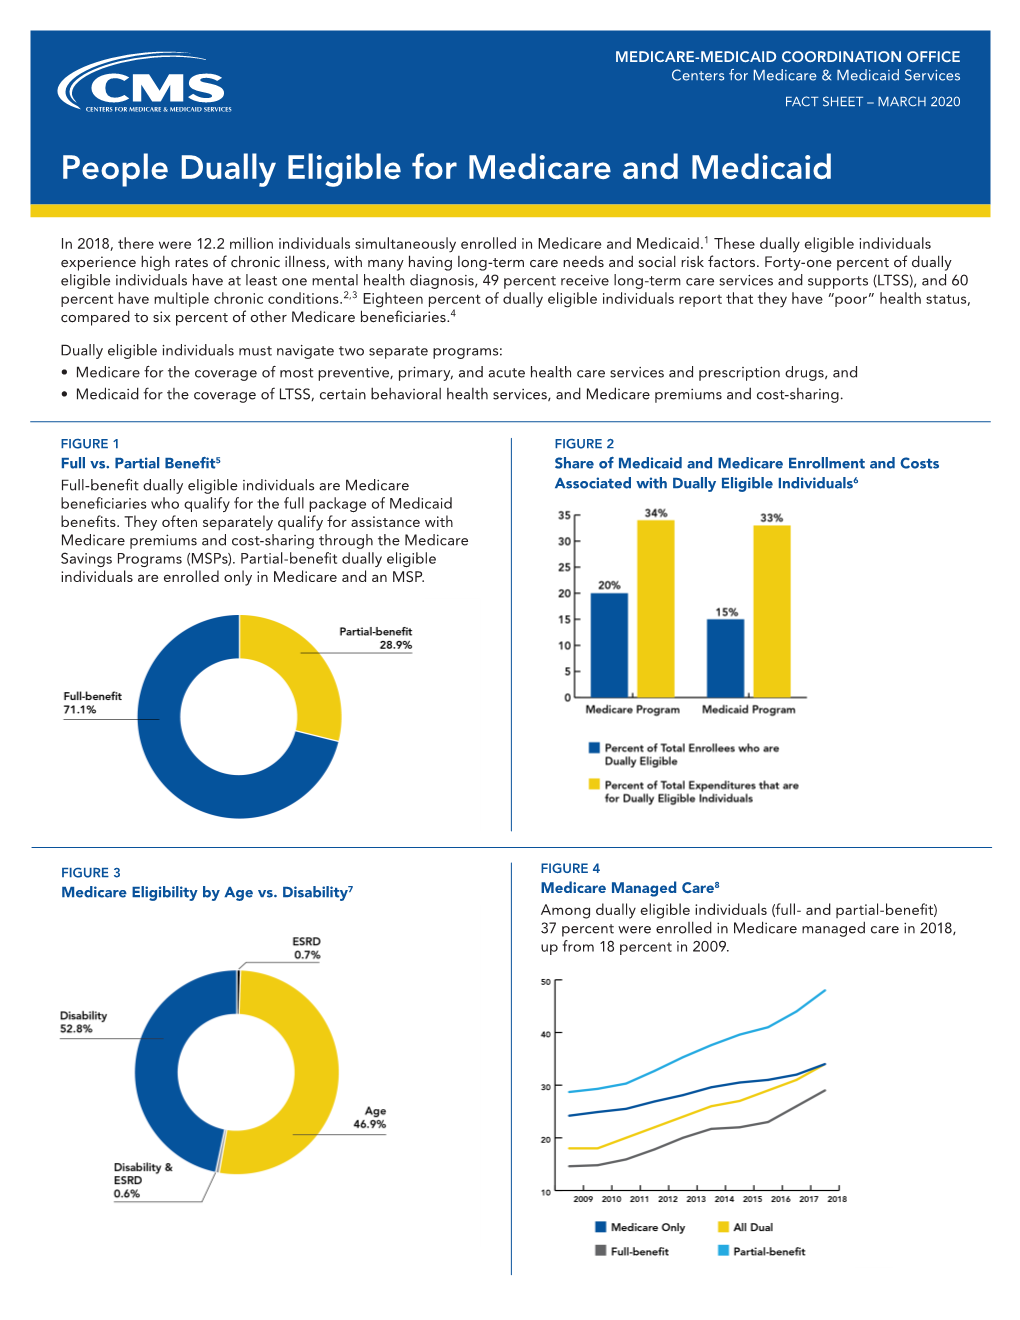 People Dually Eligible for Medicare and Medicaid Fact Sheet